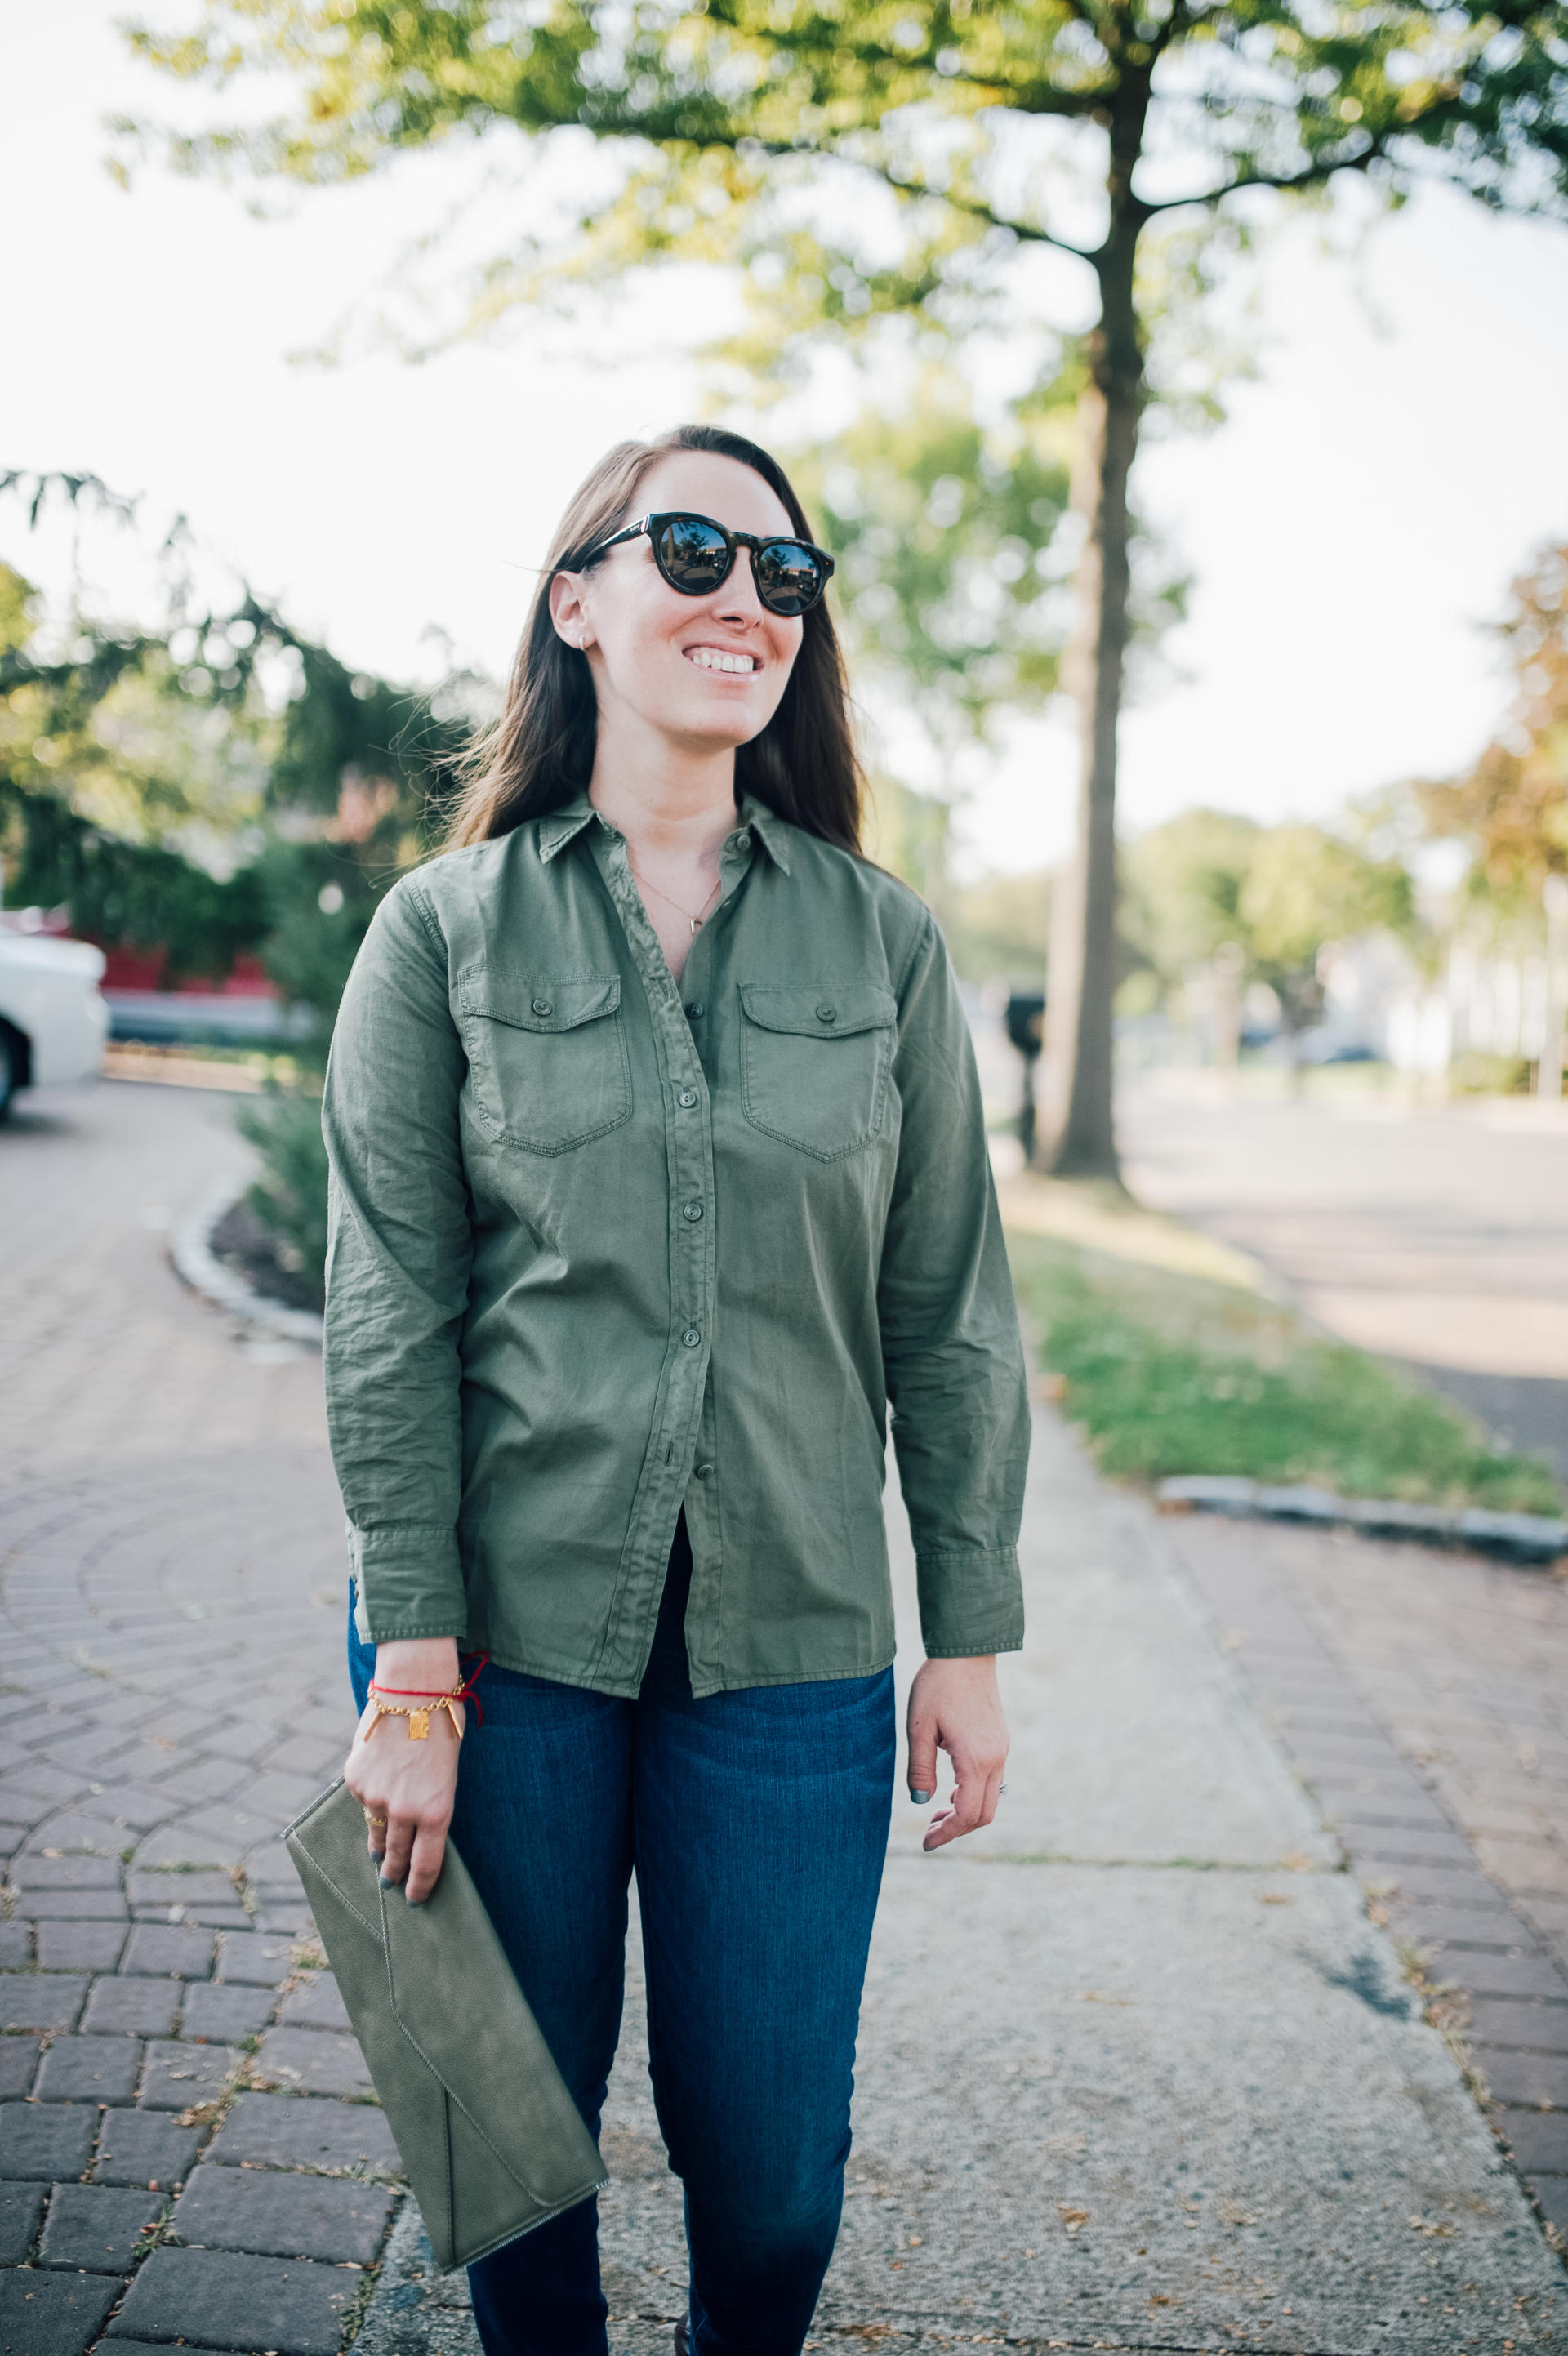 STYLE: Olive You - Trendy Olive Outfit by New Jersey fashion blogger What's For Dinner Esq.